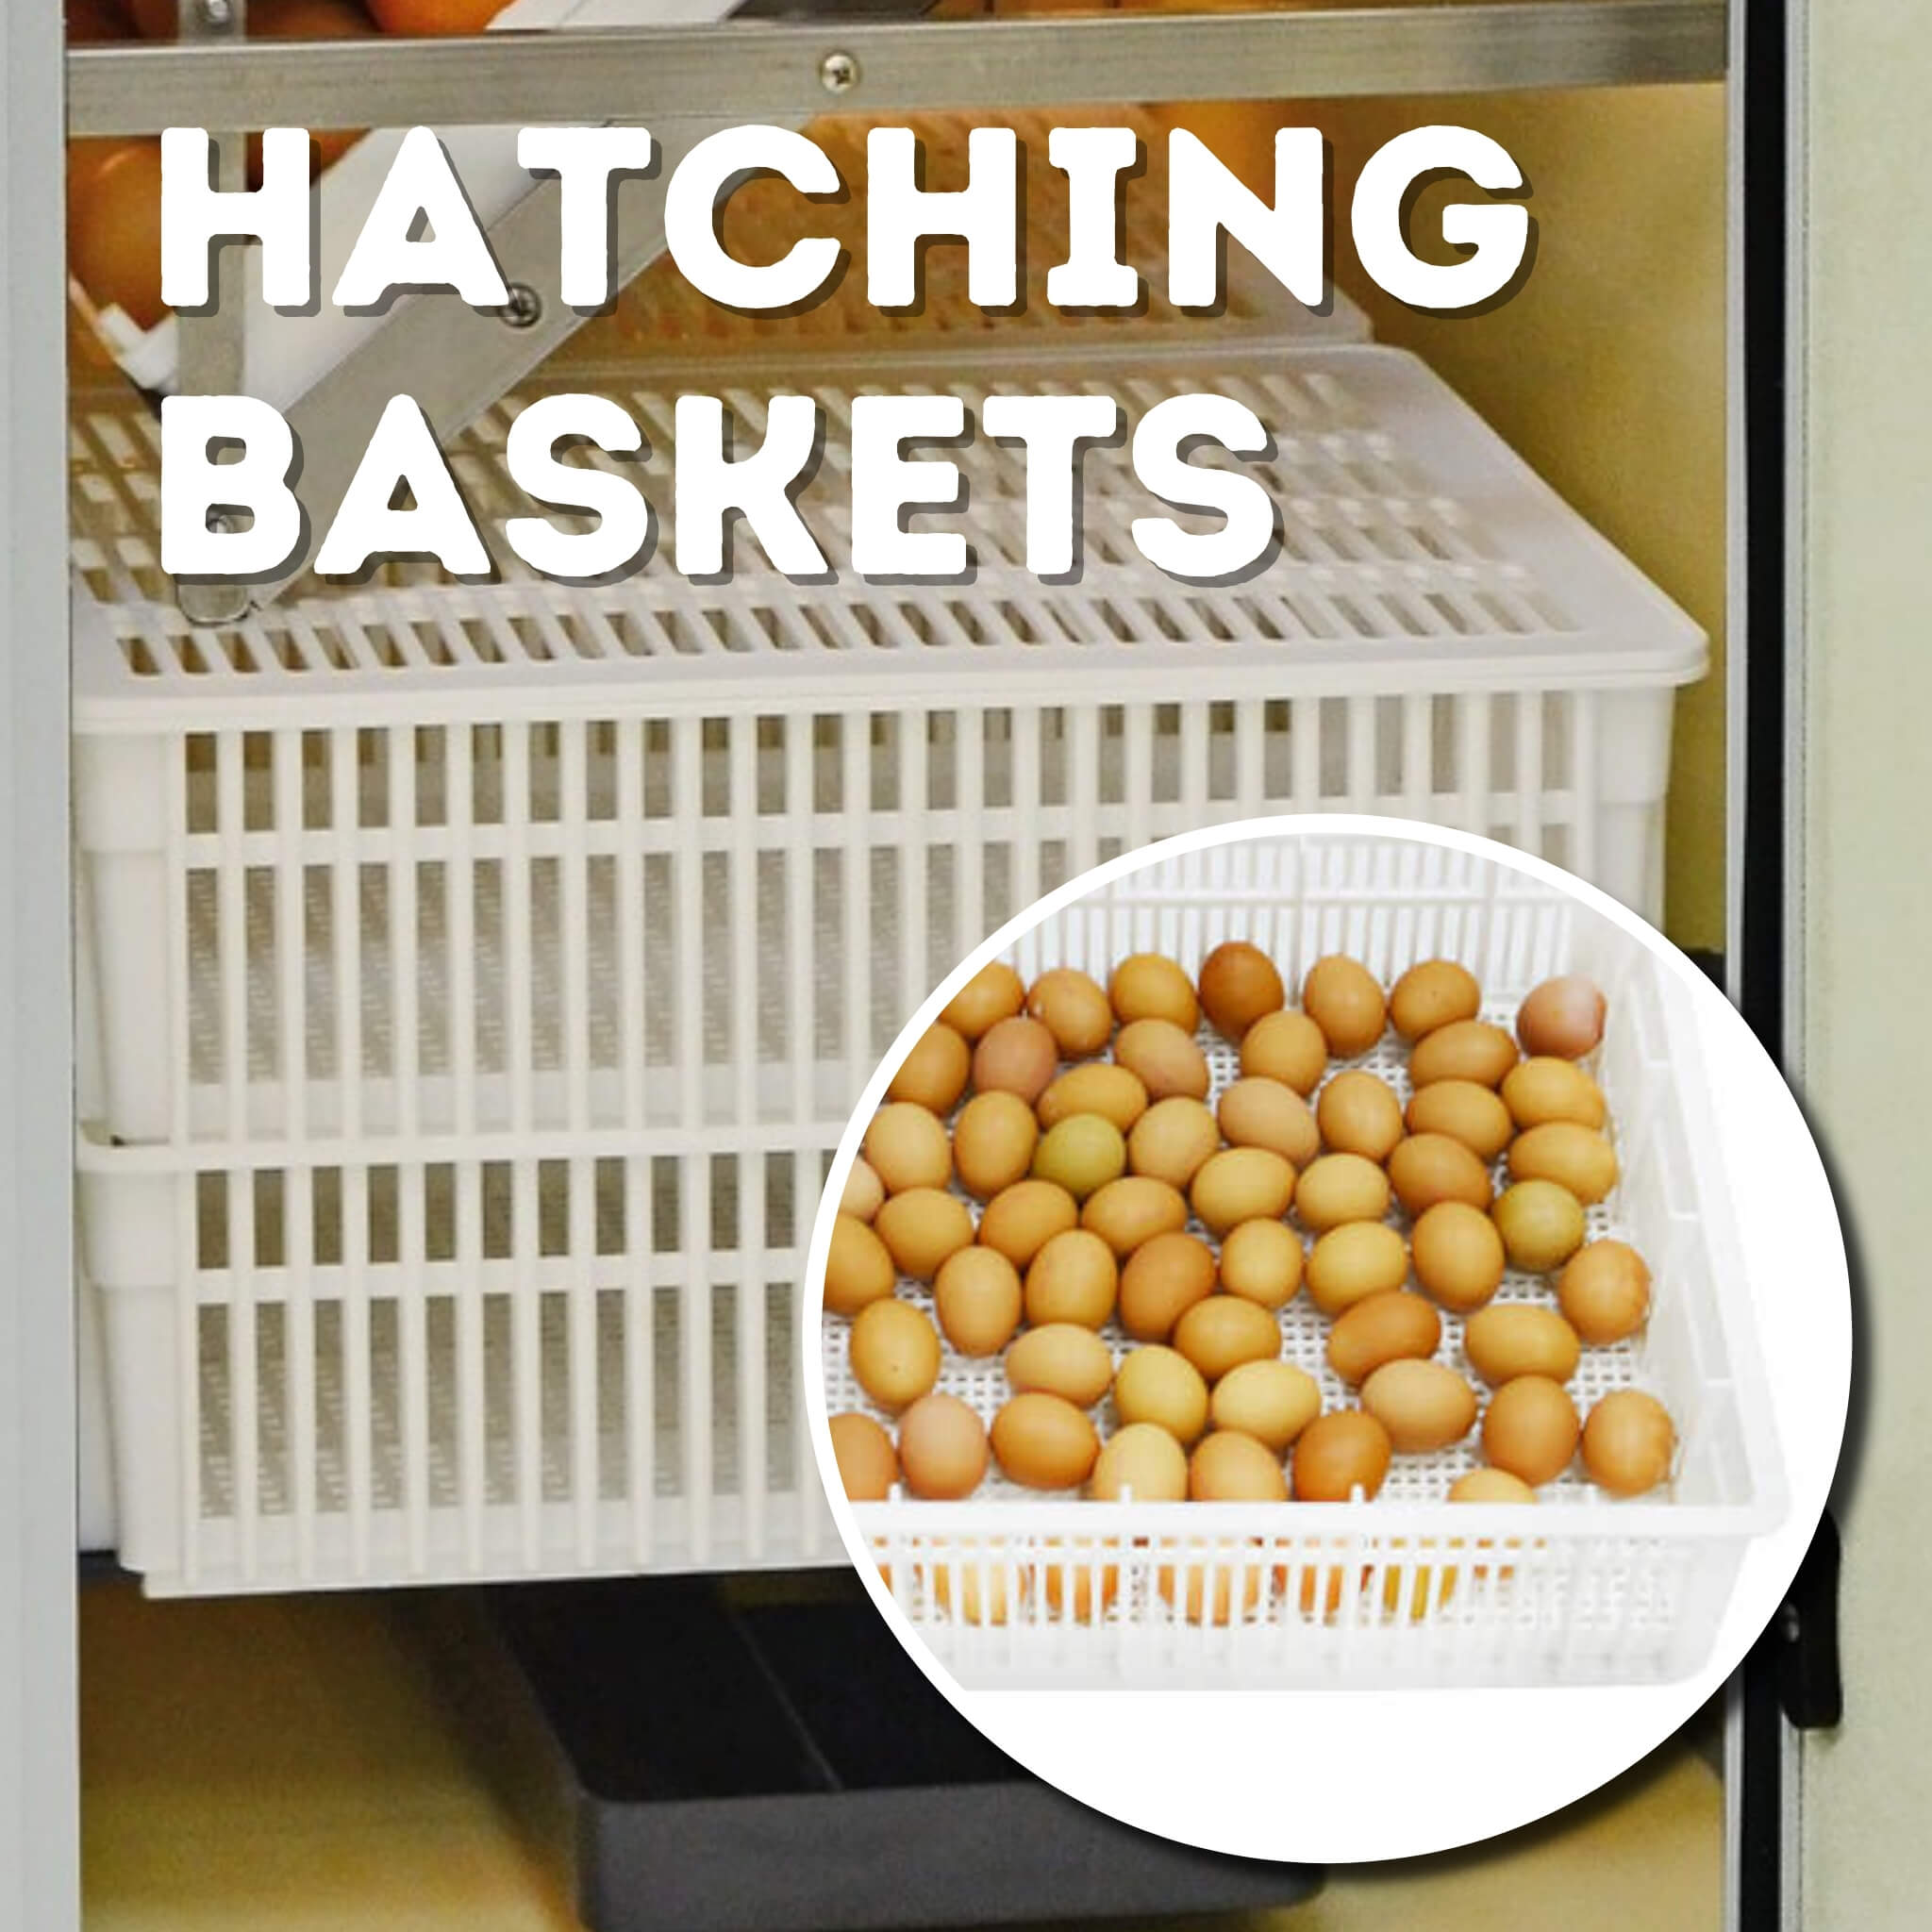 Hatching Time Cimuka. Graphic showing hatching baskets located at bottom of HB500C. Combination setter and hatcher allows for hatching within same incubator. Image shows basket full of brown chicken eggs.